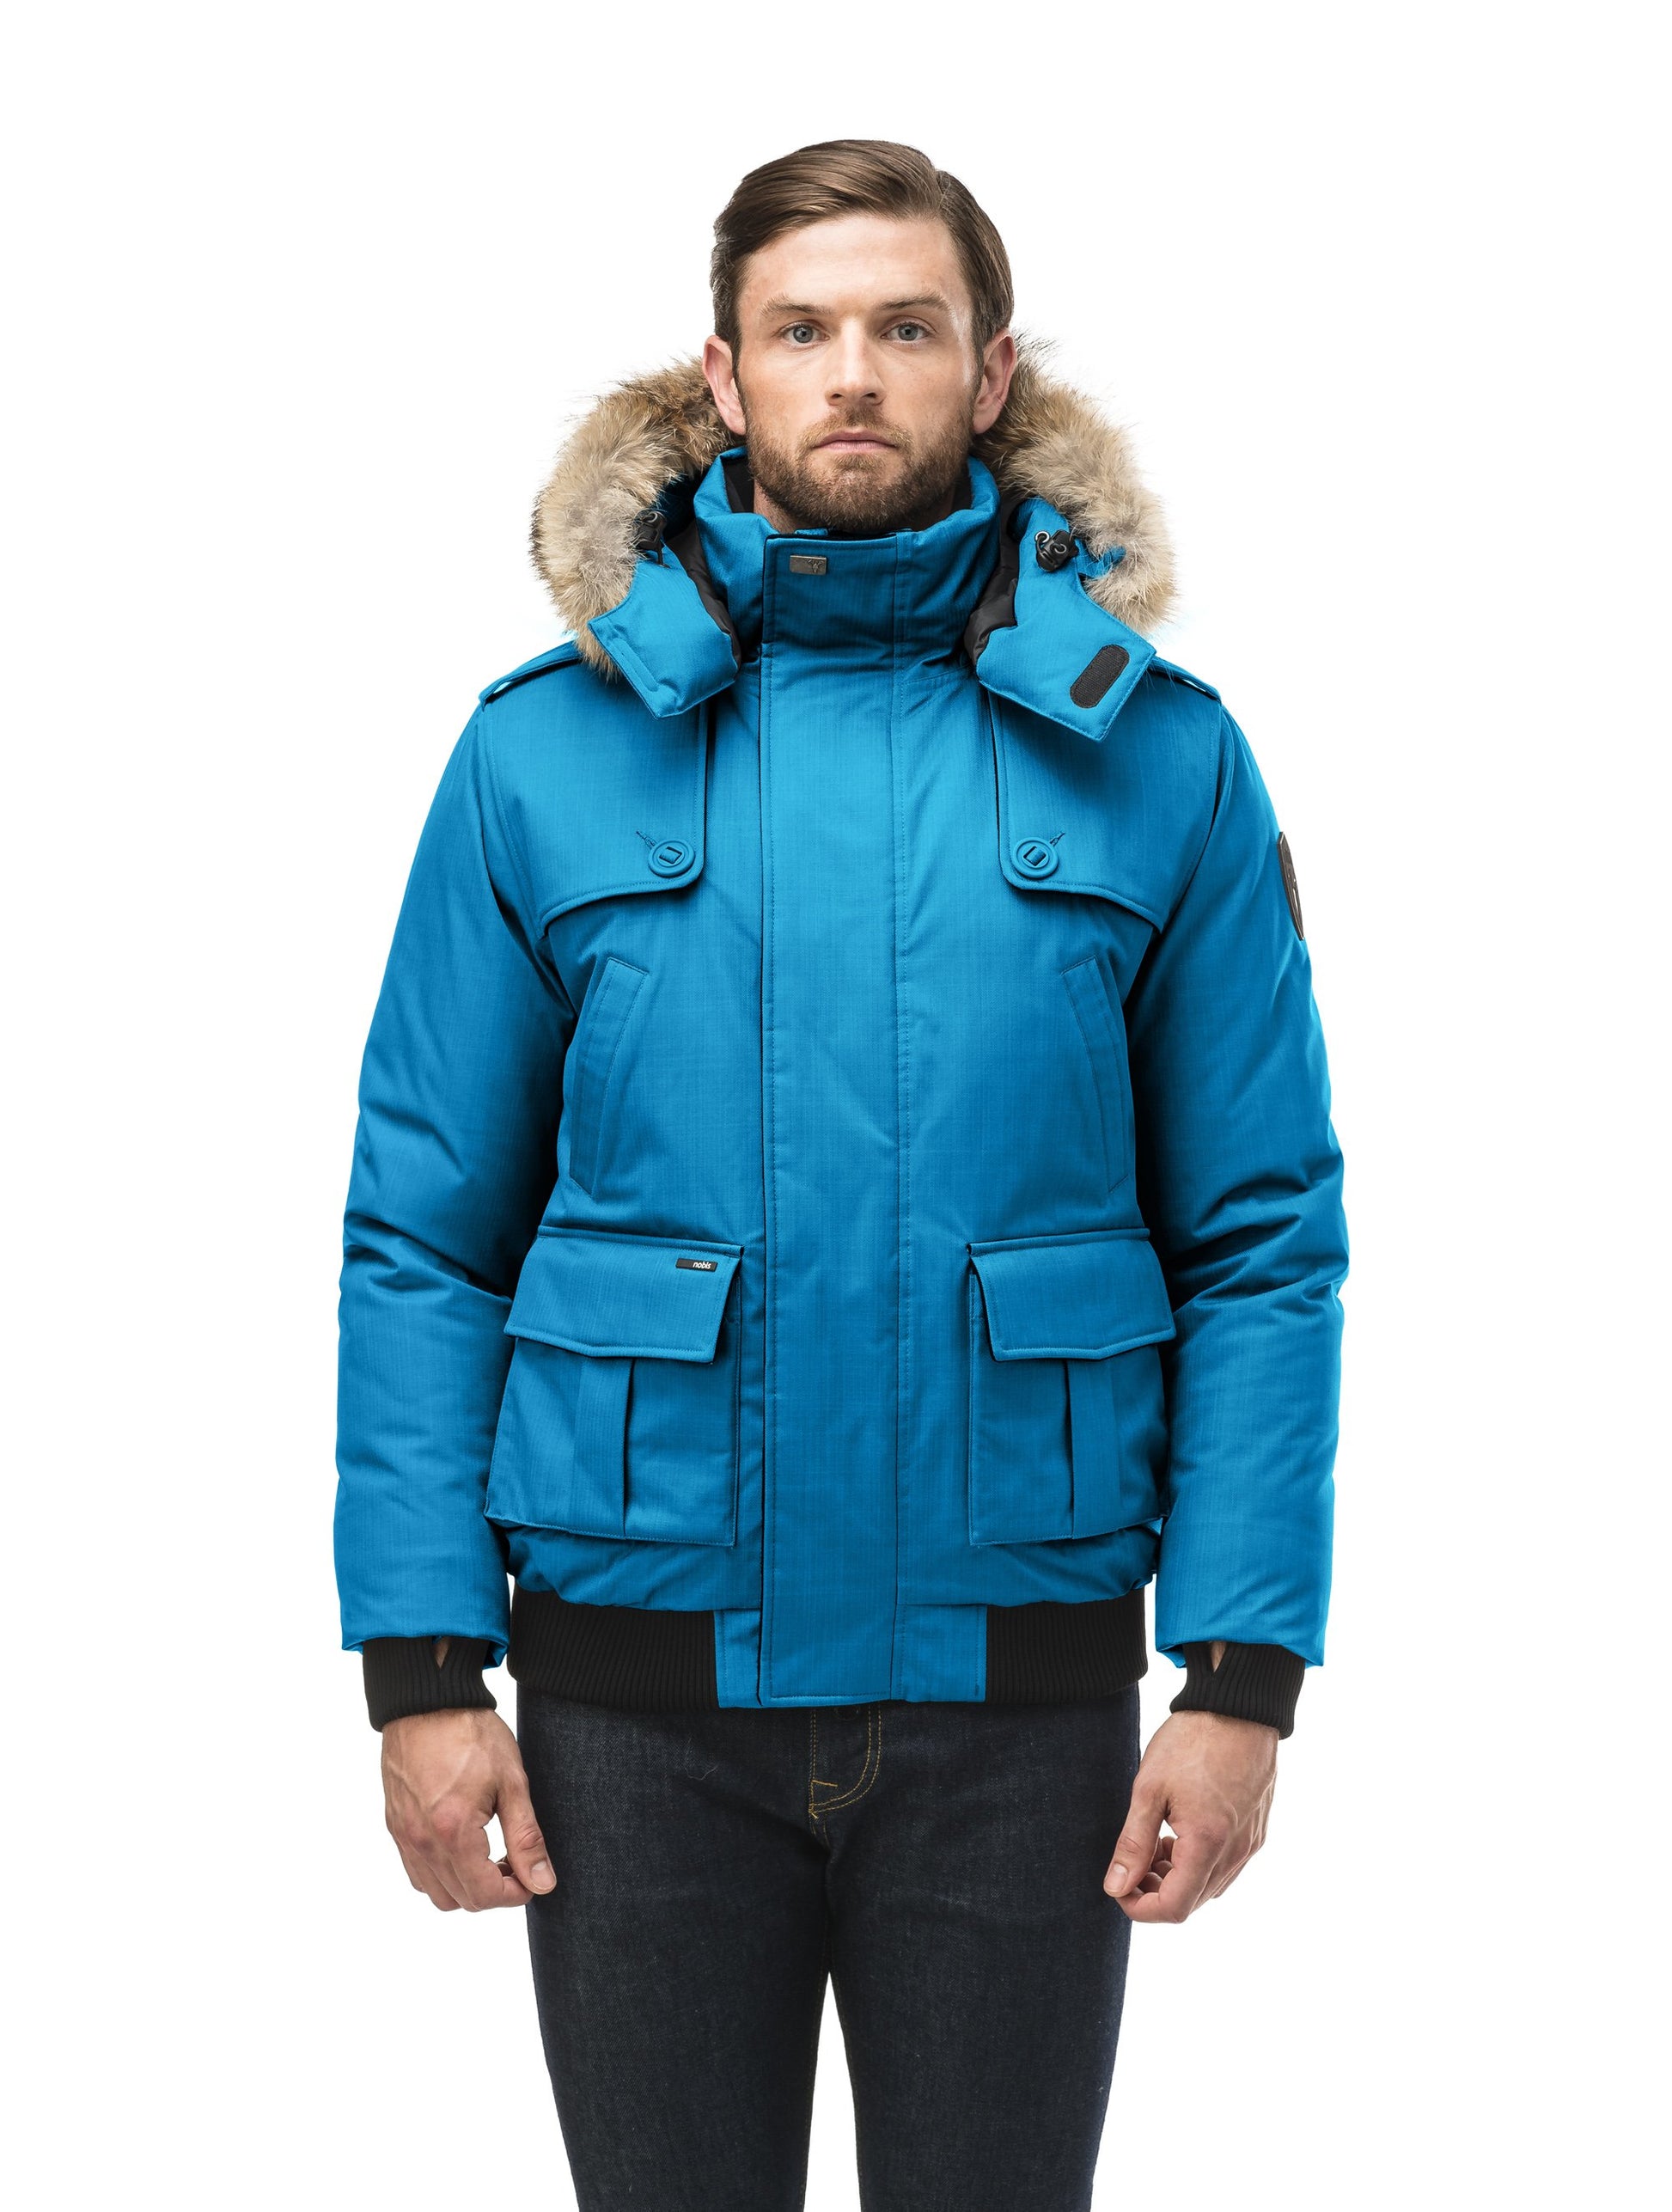 Men's down filled bomber that sits just above the hips with a completely removable hood that's windproof, waterproof, and breathable in Sea Blue